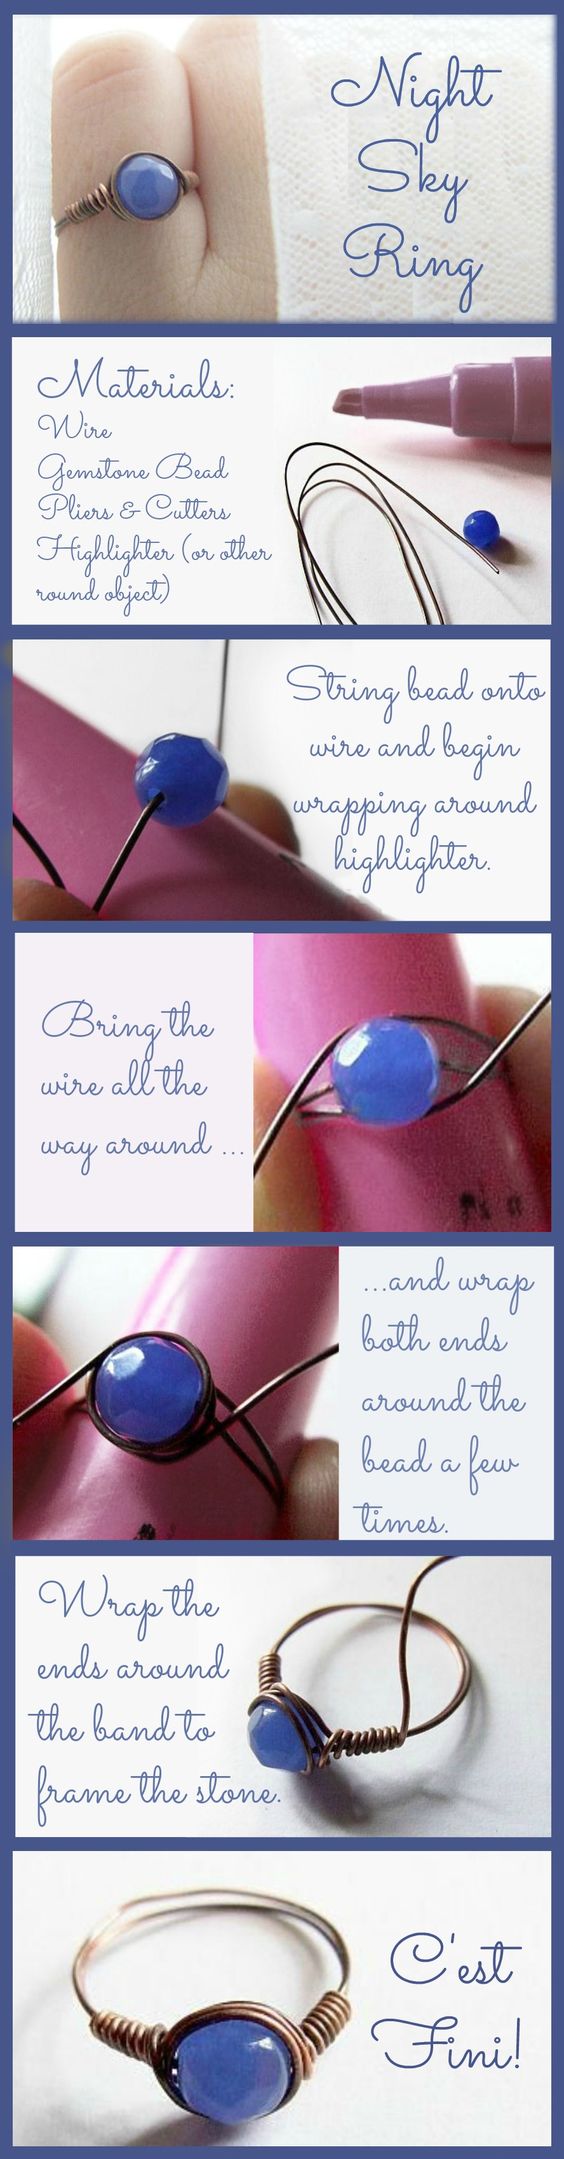 wire-rings-with-blue-gem via